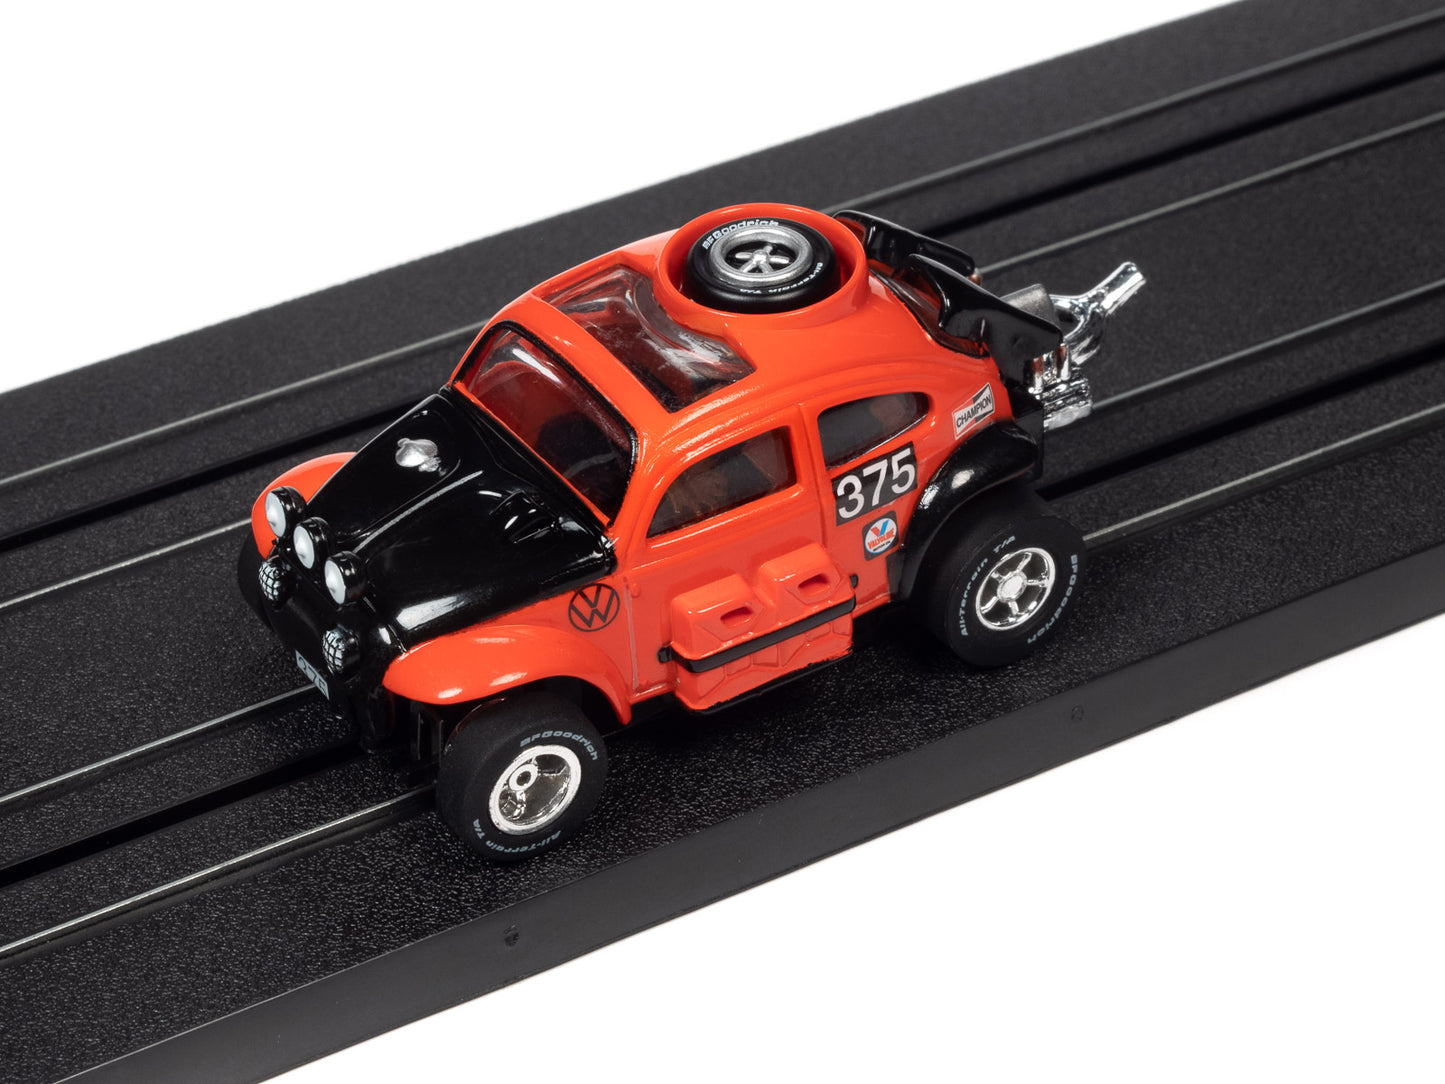 1965 Volkswagen Baja Bug (Orange) H.O. Scale Slot Car, Xtraction Chassis